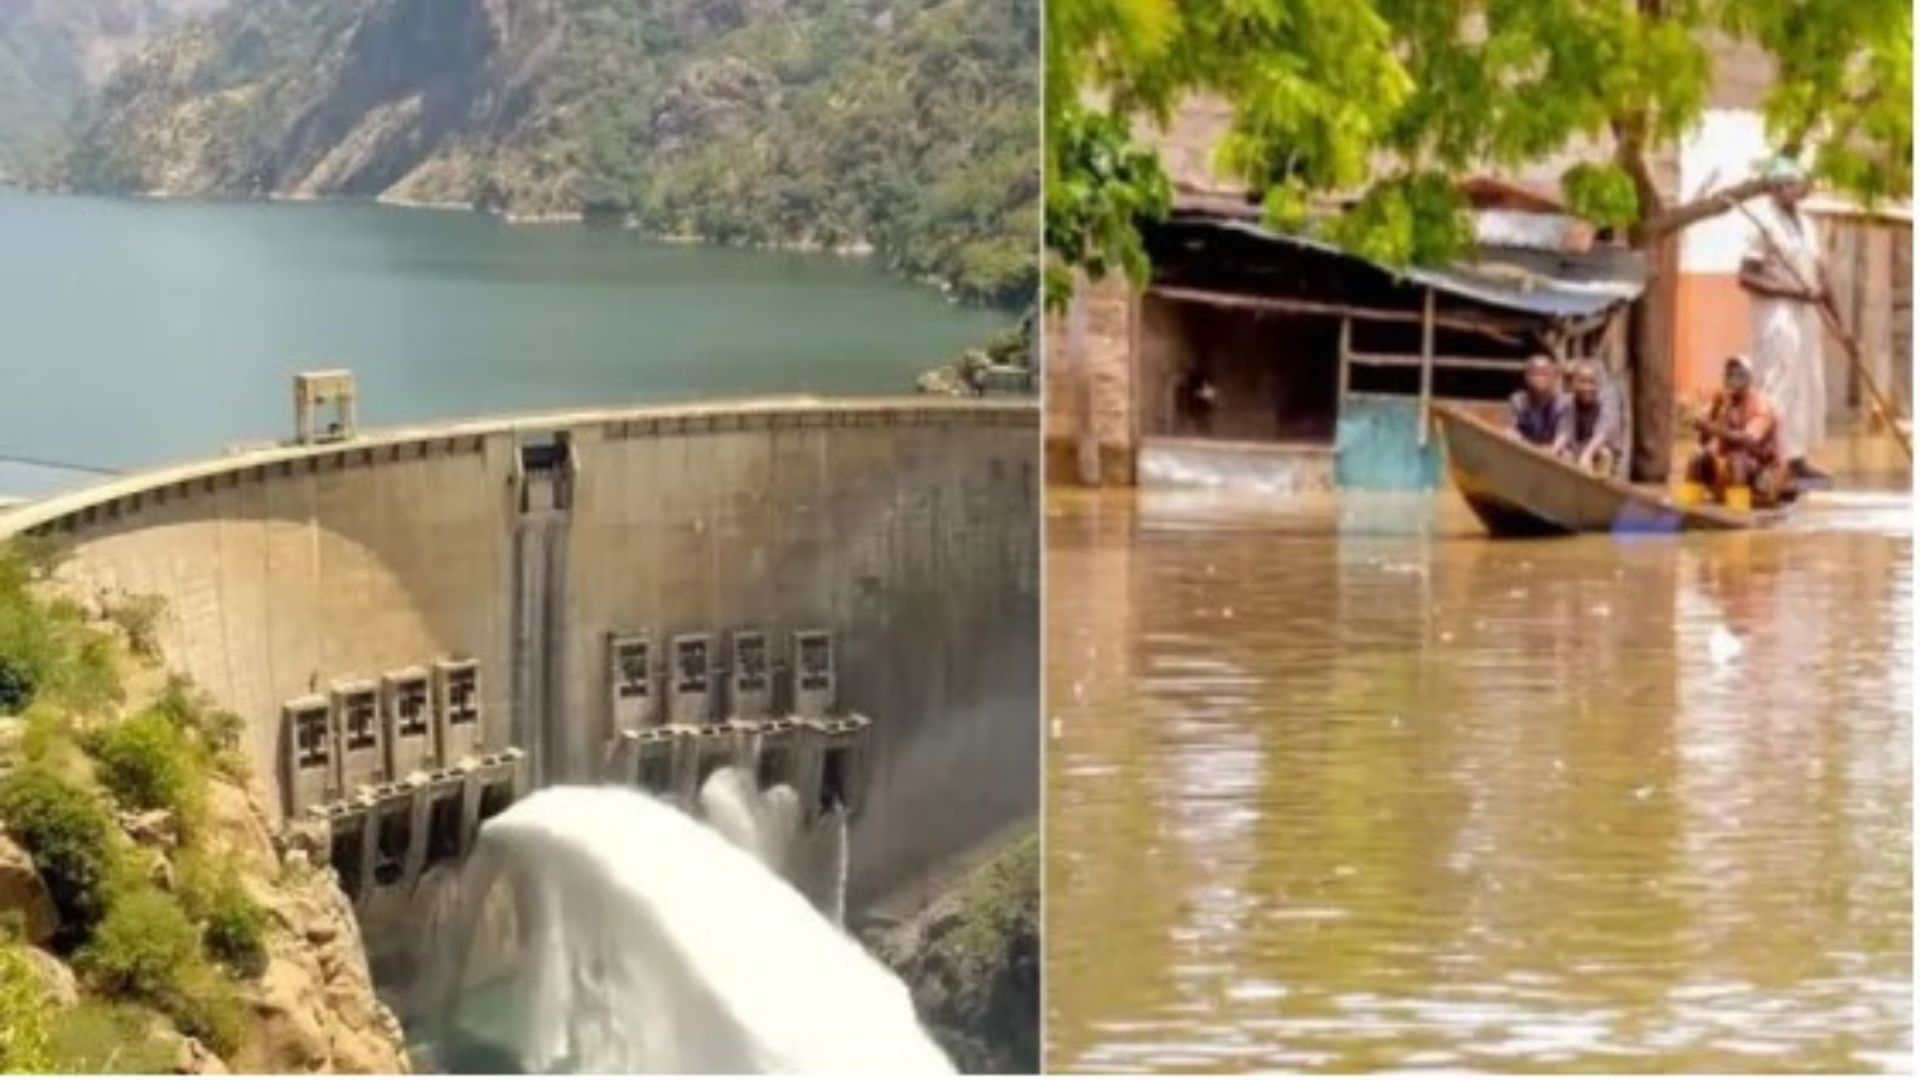 Another Massive flood coming in Nigeria as Cameroon set to open Lagdo Dam